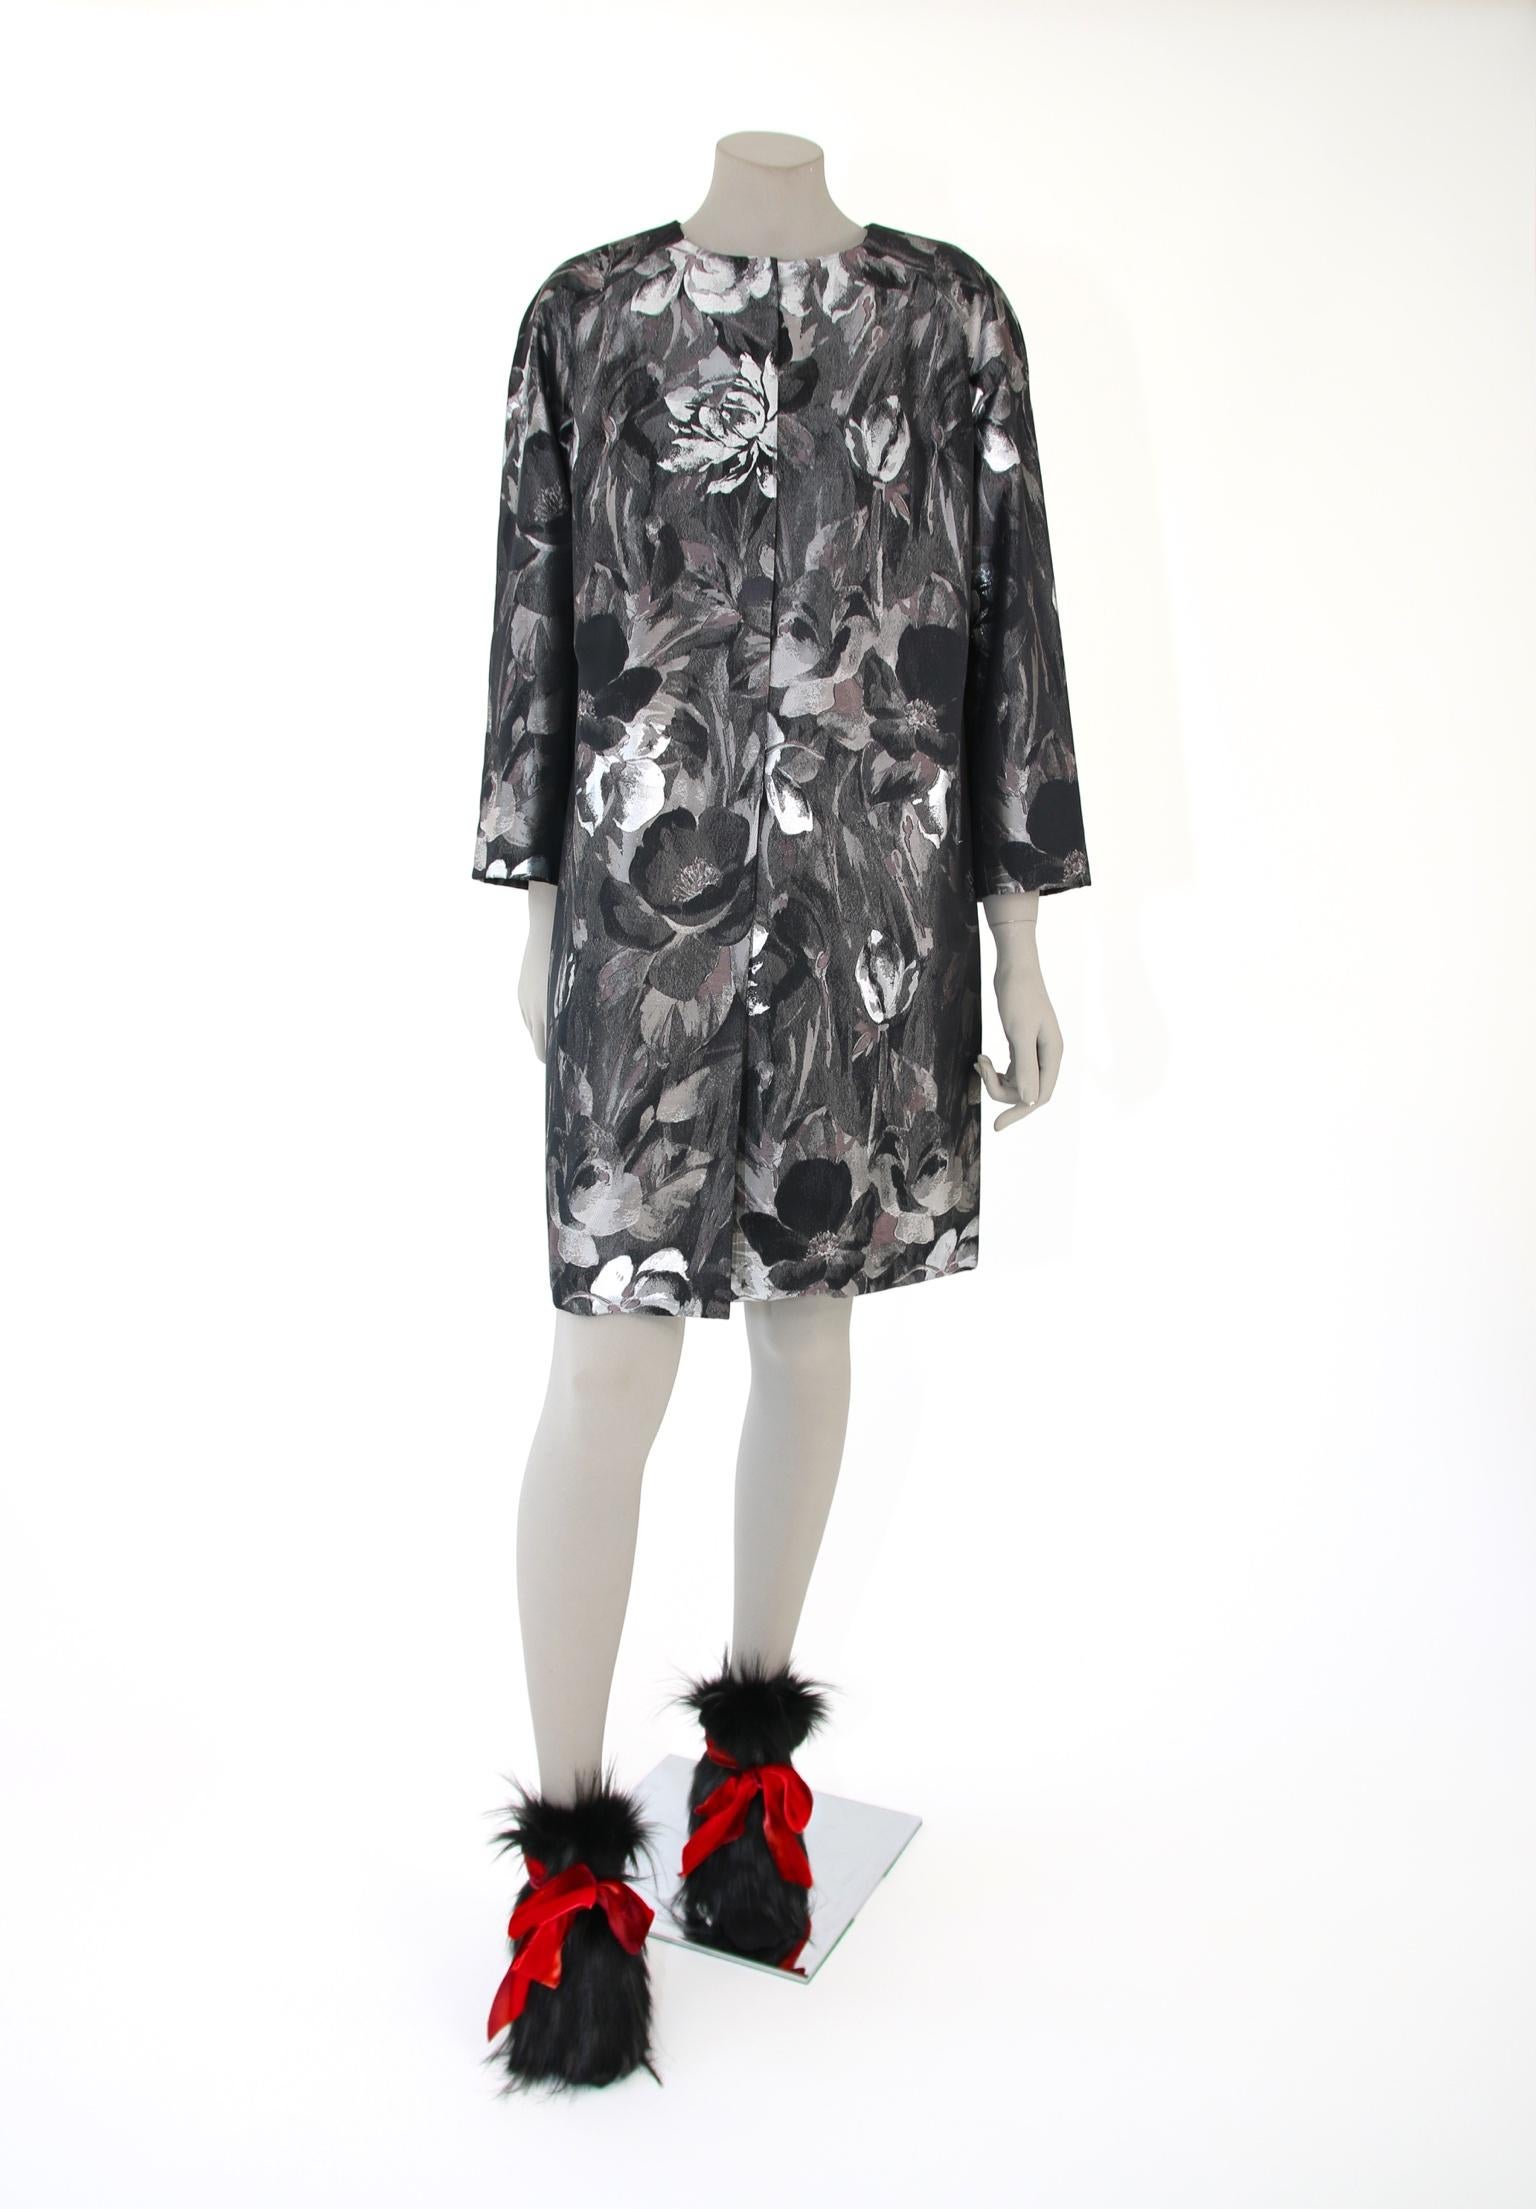 Pelush Black and Silver Brocade Printed Flower Coat - XS For Sale 7